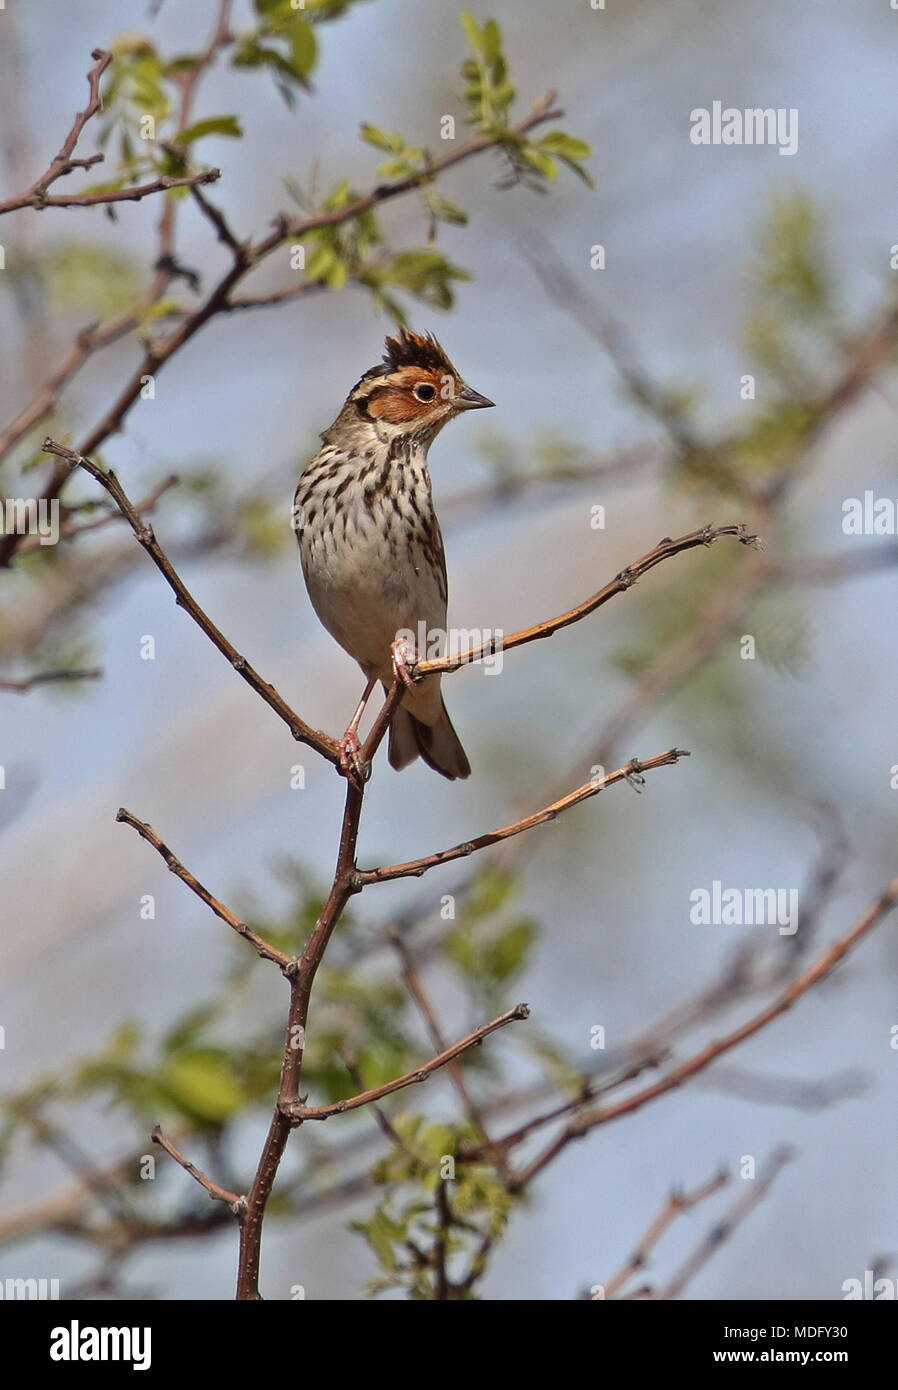 Little Bunting (Emberiza pusilla) adult male perched on twig with crown feathers raised  Beidaihe, Hebei, China       May Stock Photo